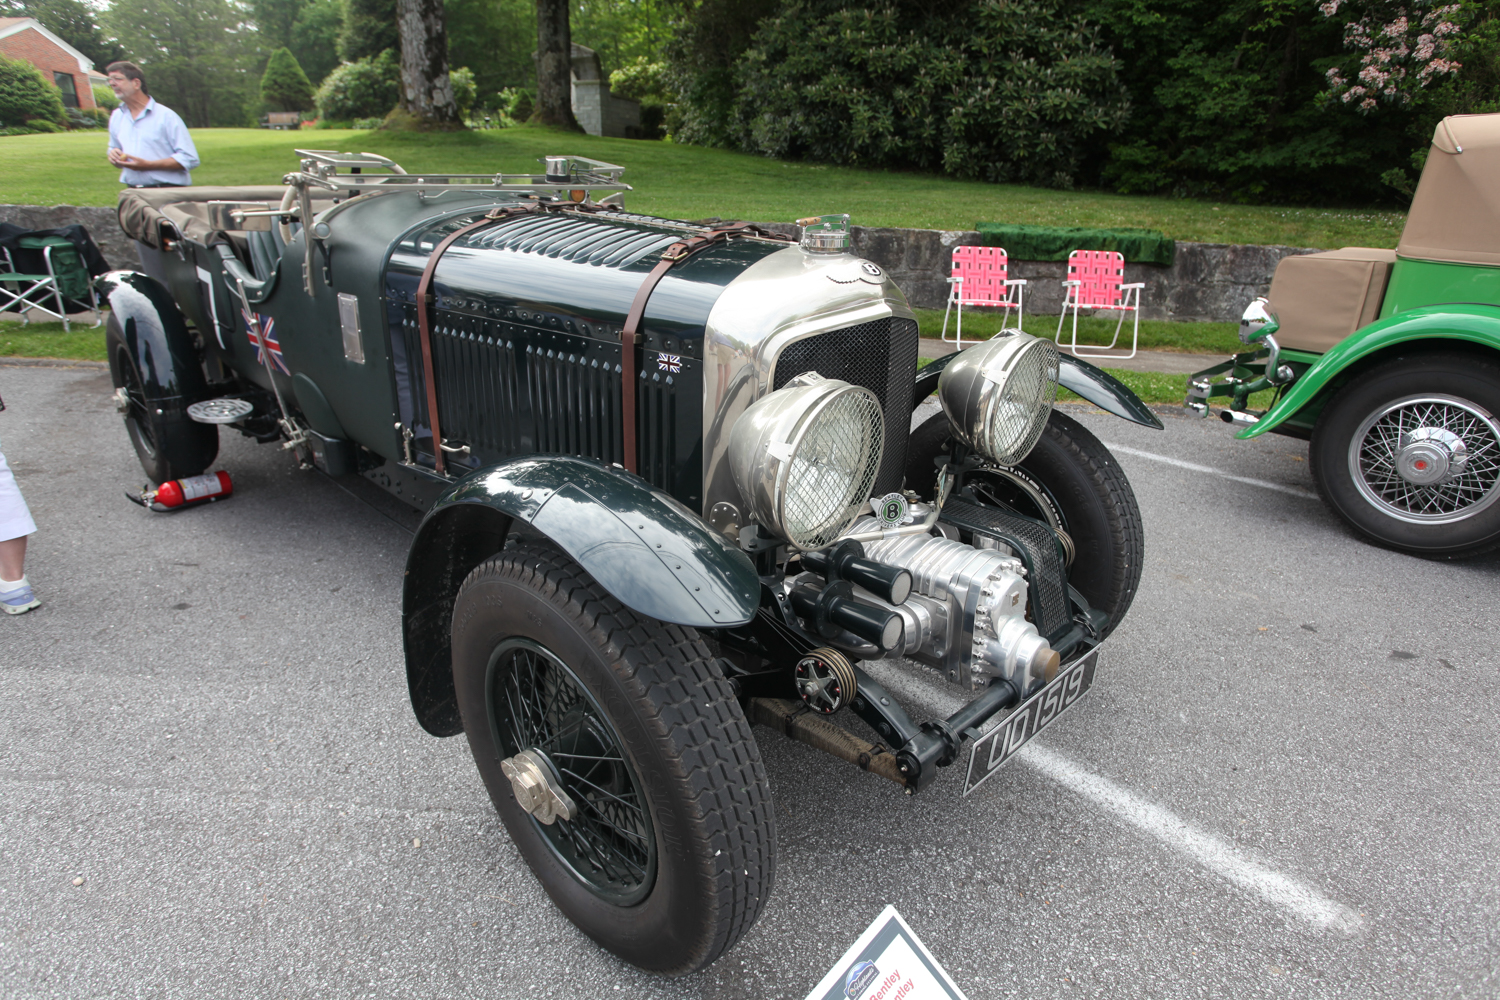 Corky Coker brought this Blower Bentley from his collection.